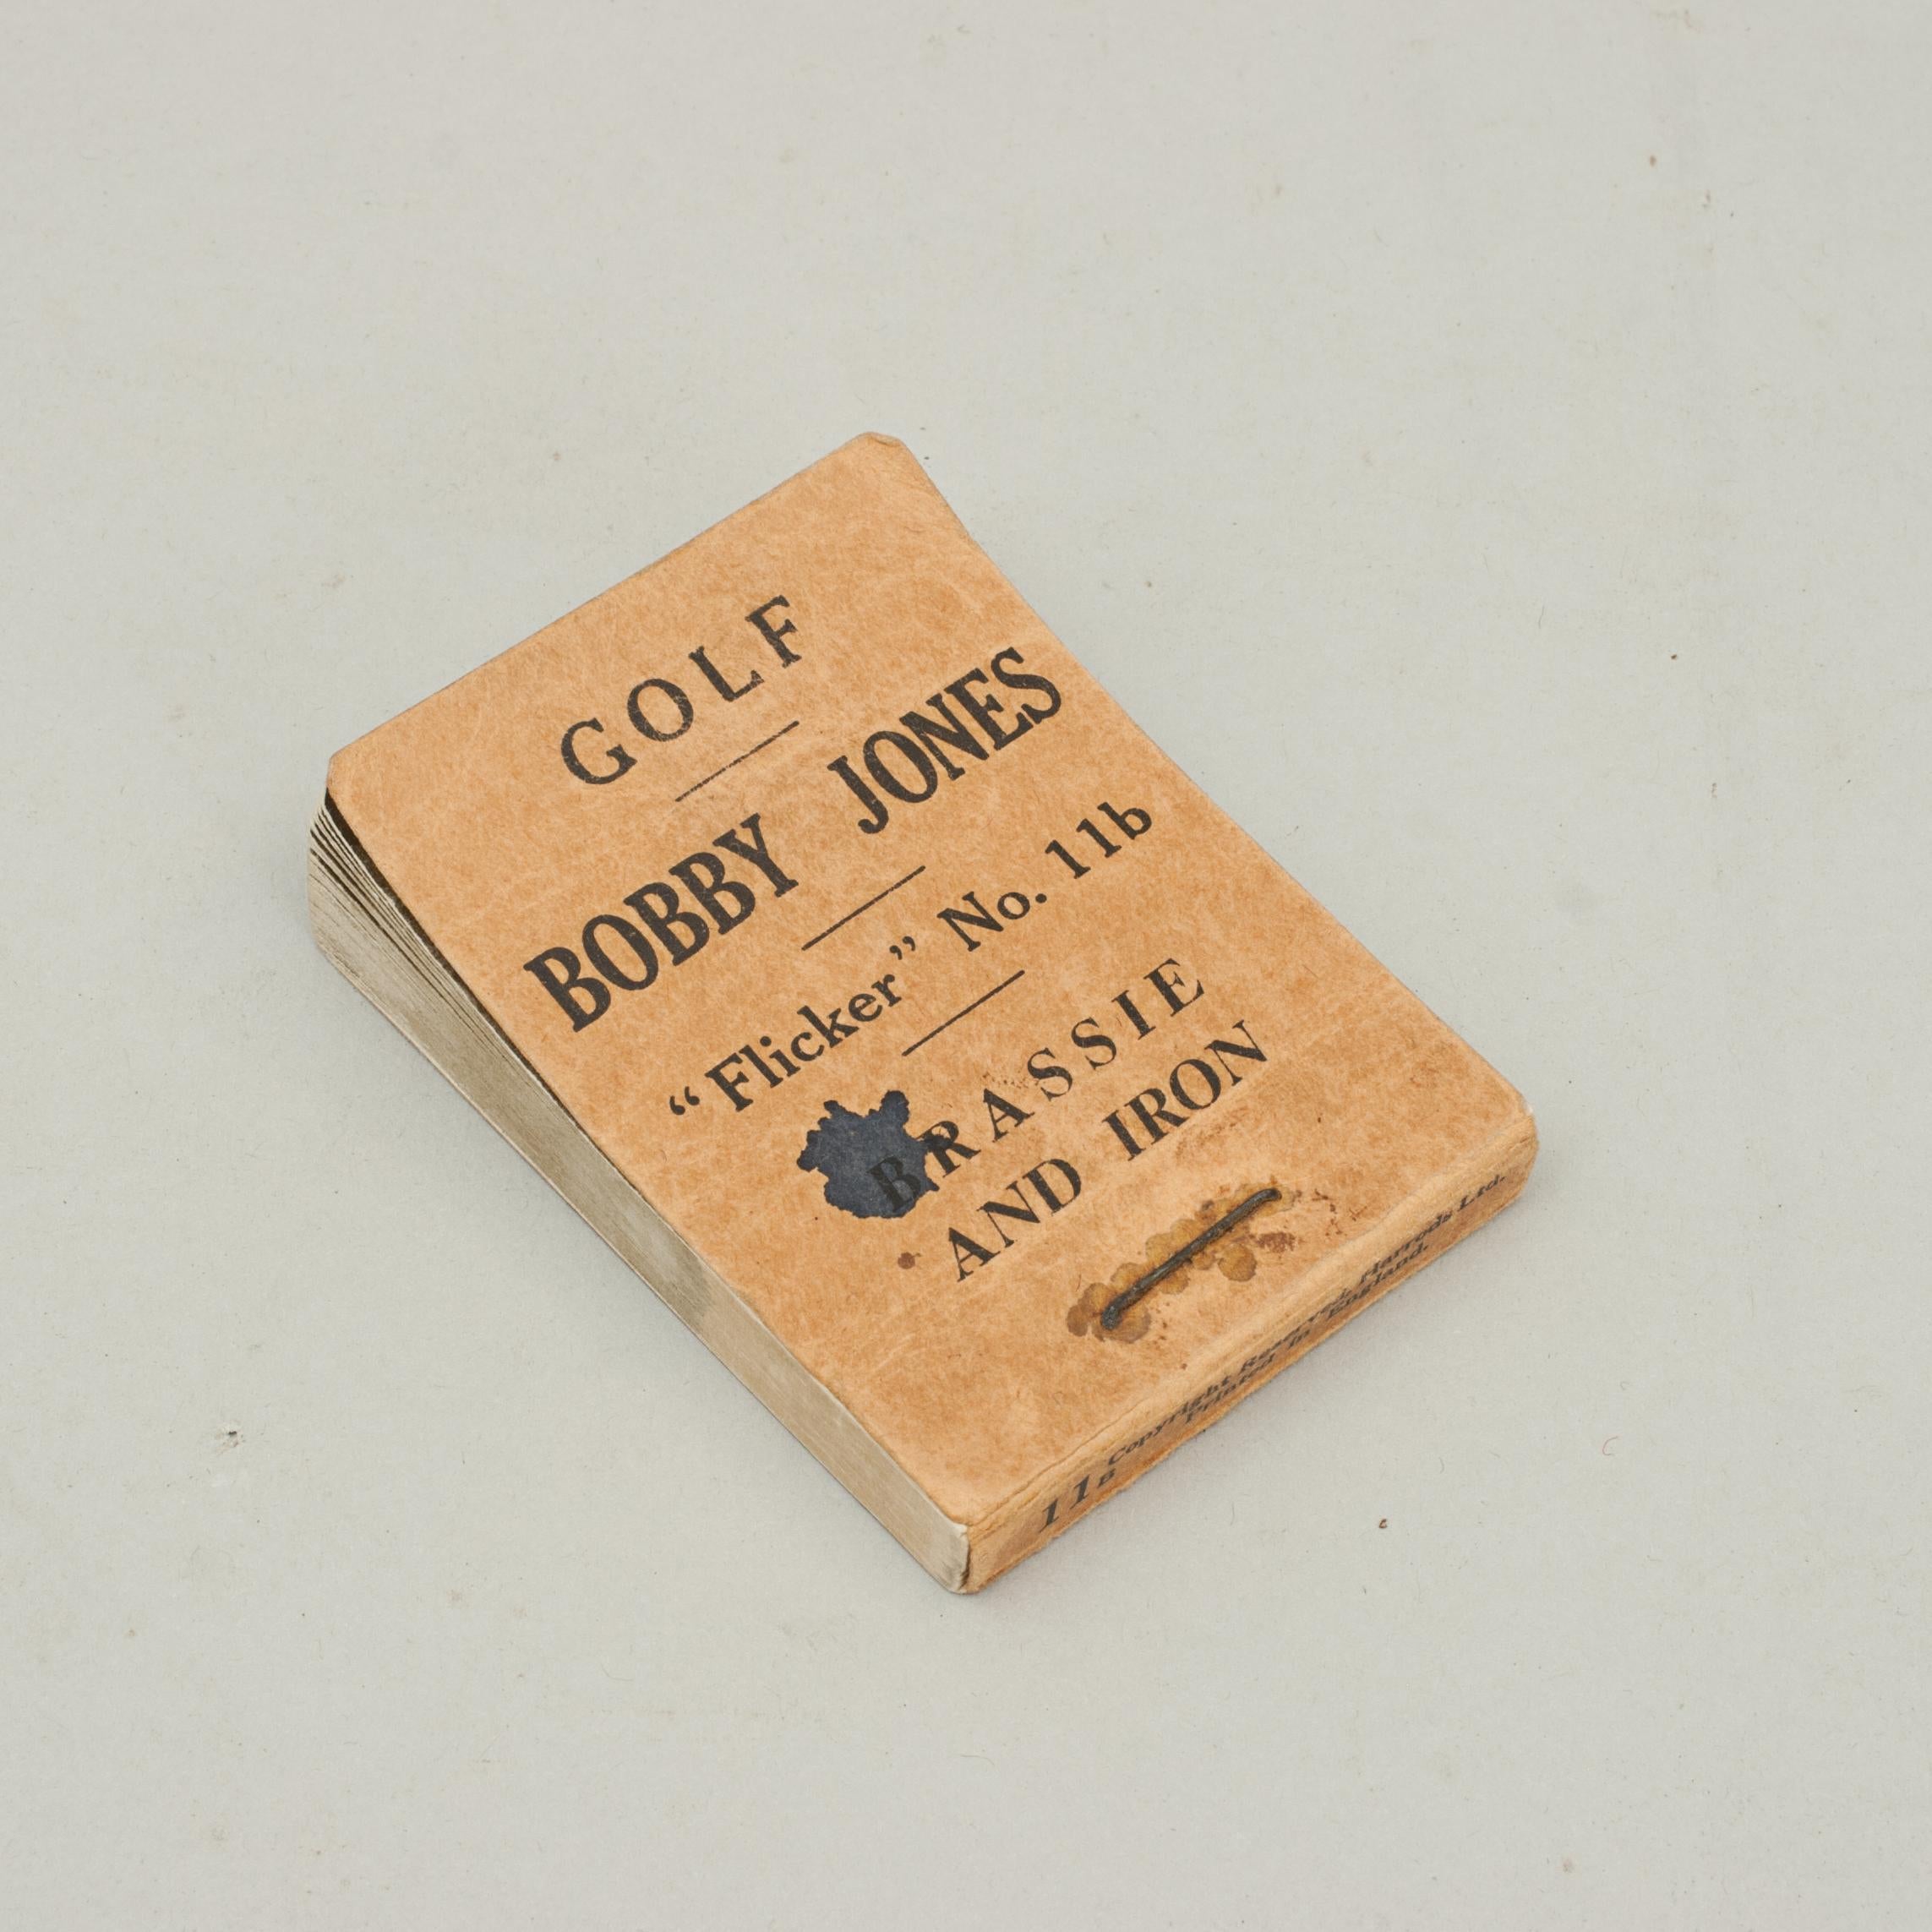 Vintage Golf Flicker book, Bobby Jones.
The flicker book is one of a set of 3 Bobby Jones books, This is No. 11b Brassie And Iron.
Produced by Flicker Productions Ltd., 113b Earl's Court Road, London, SW5, phone Frobisher 3277. Copyright reserved,